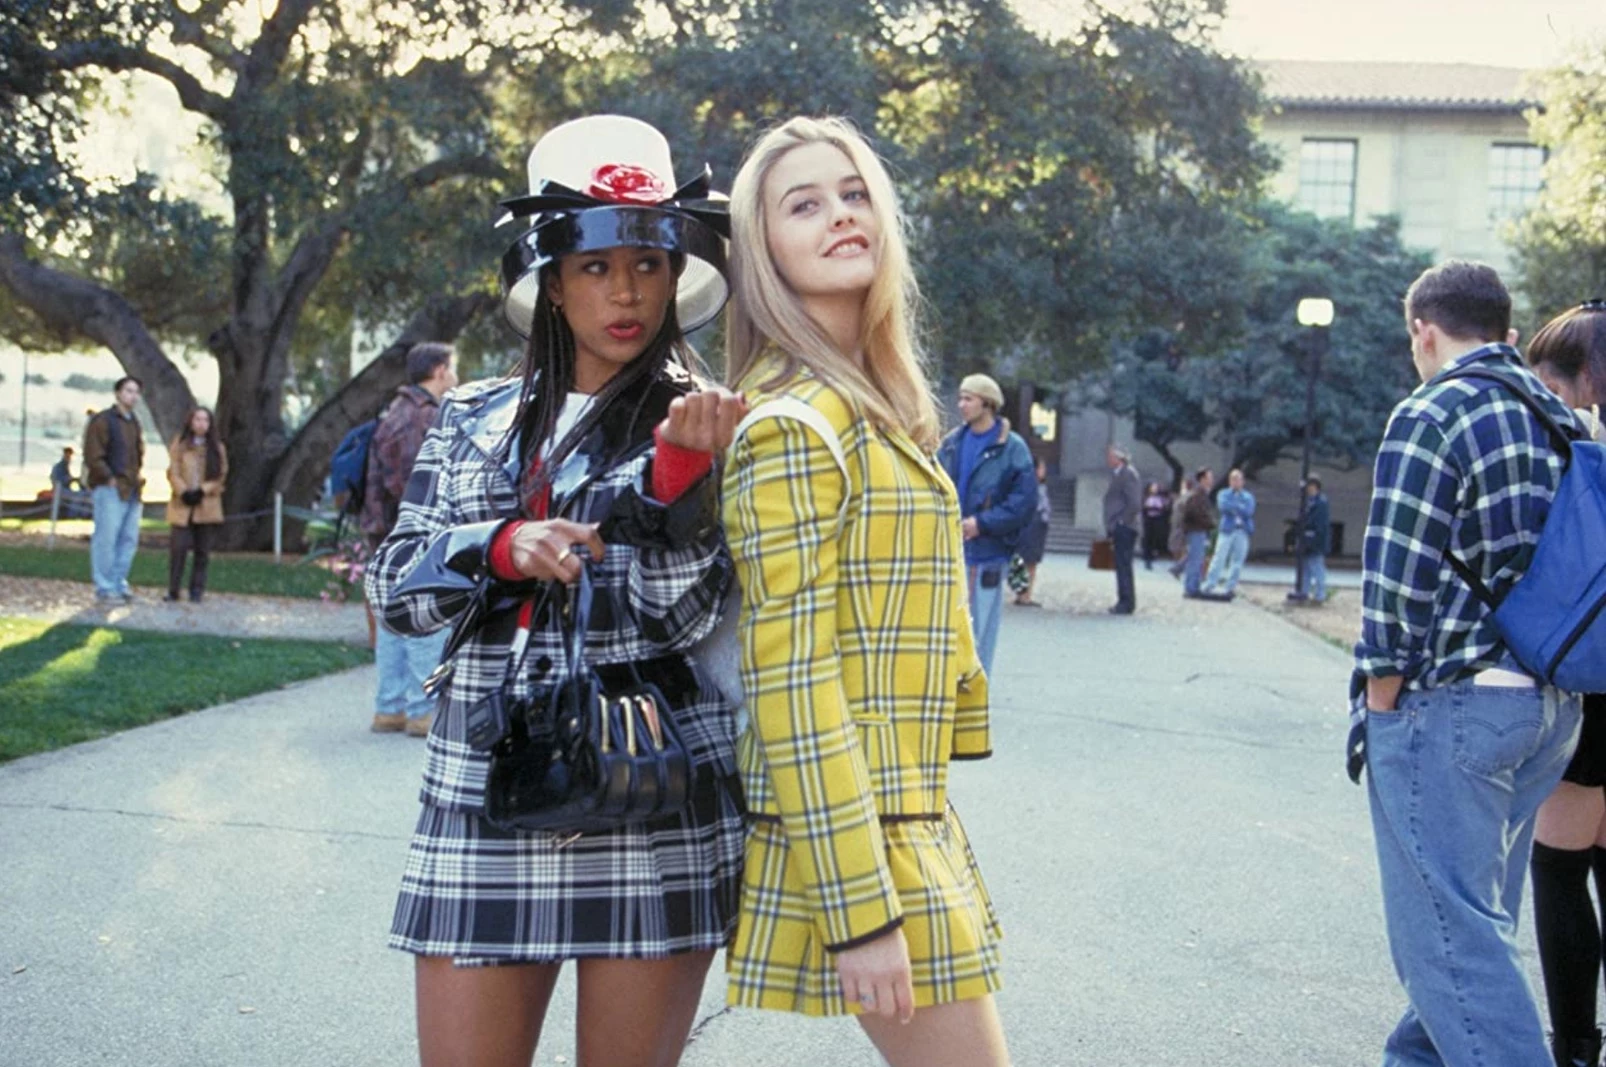 A New Clueless TV Show Isnt Happening, But a New Movie Might